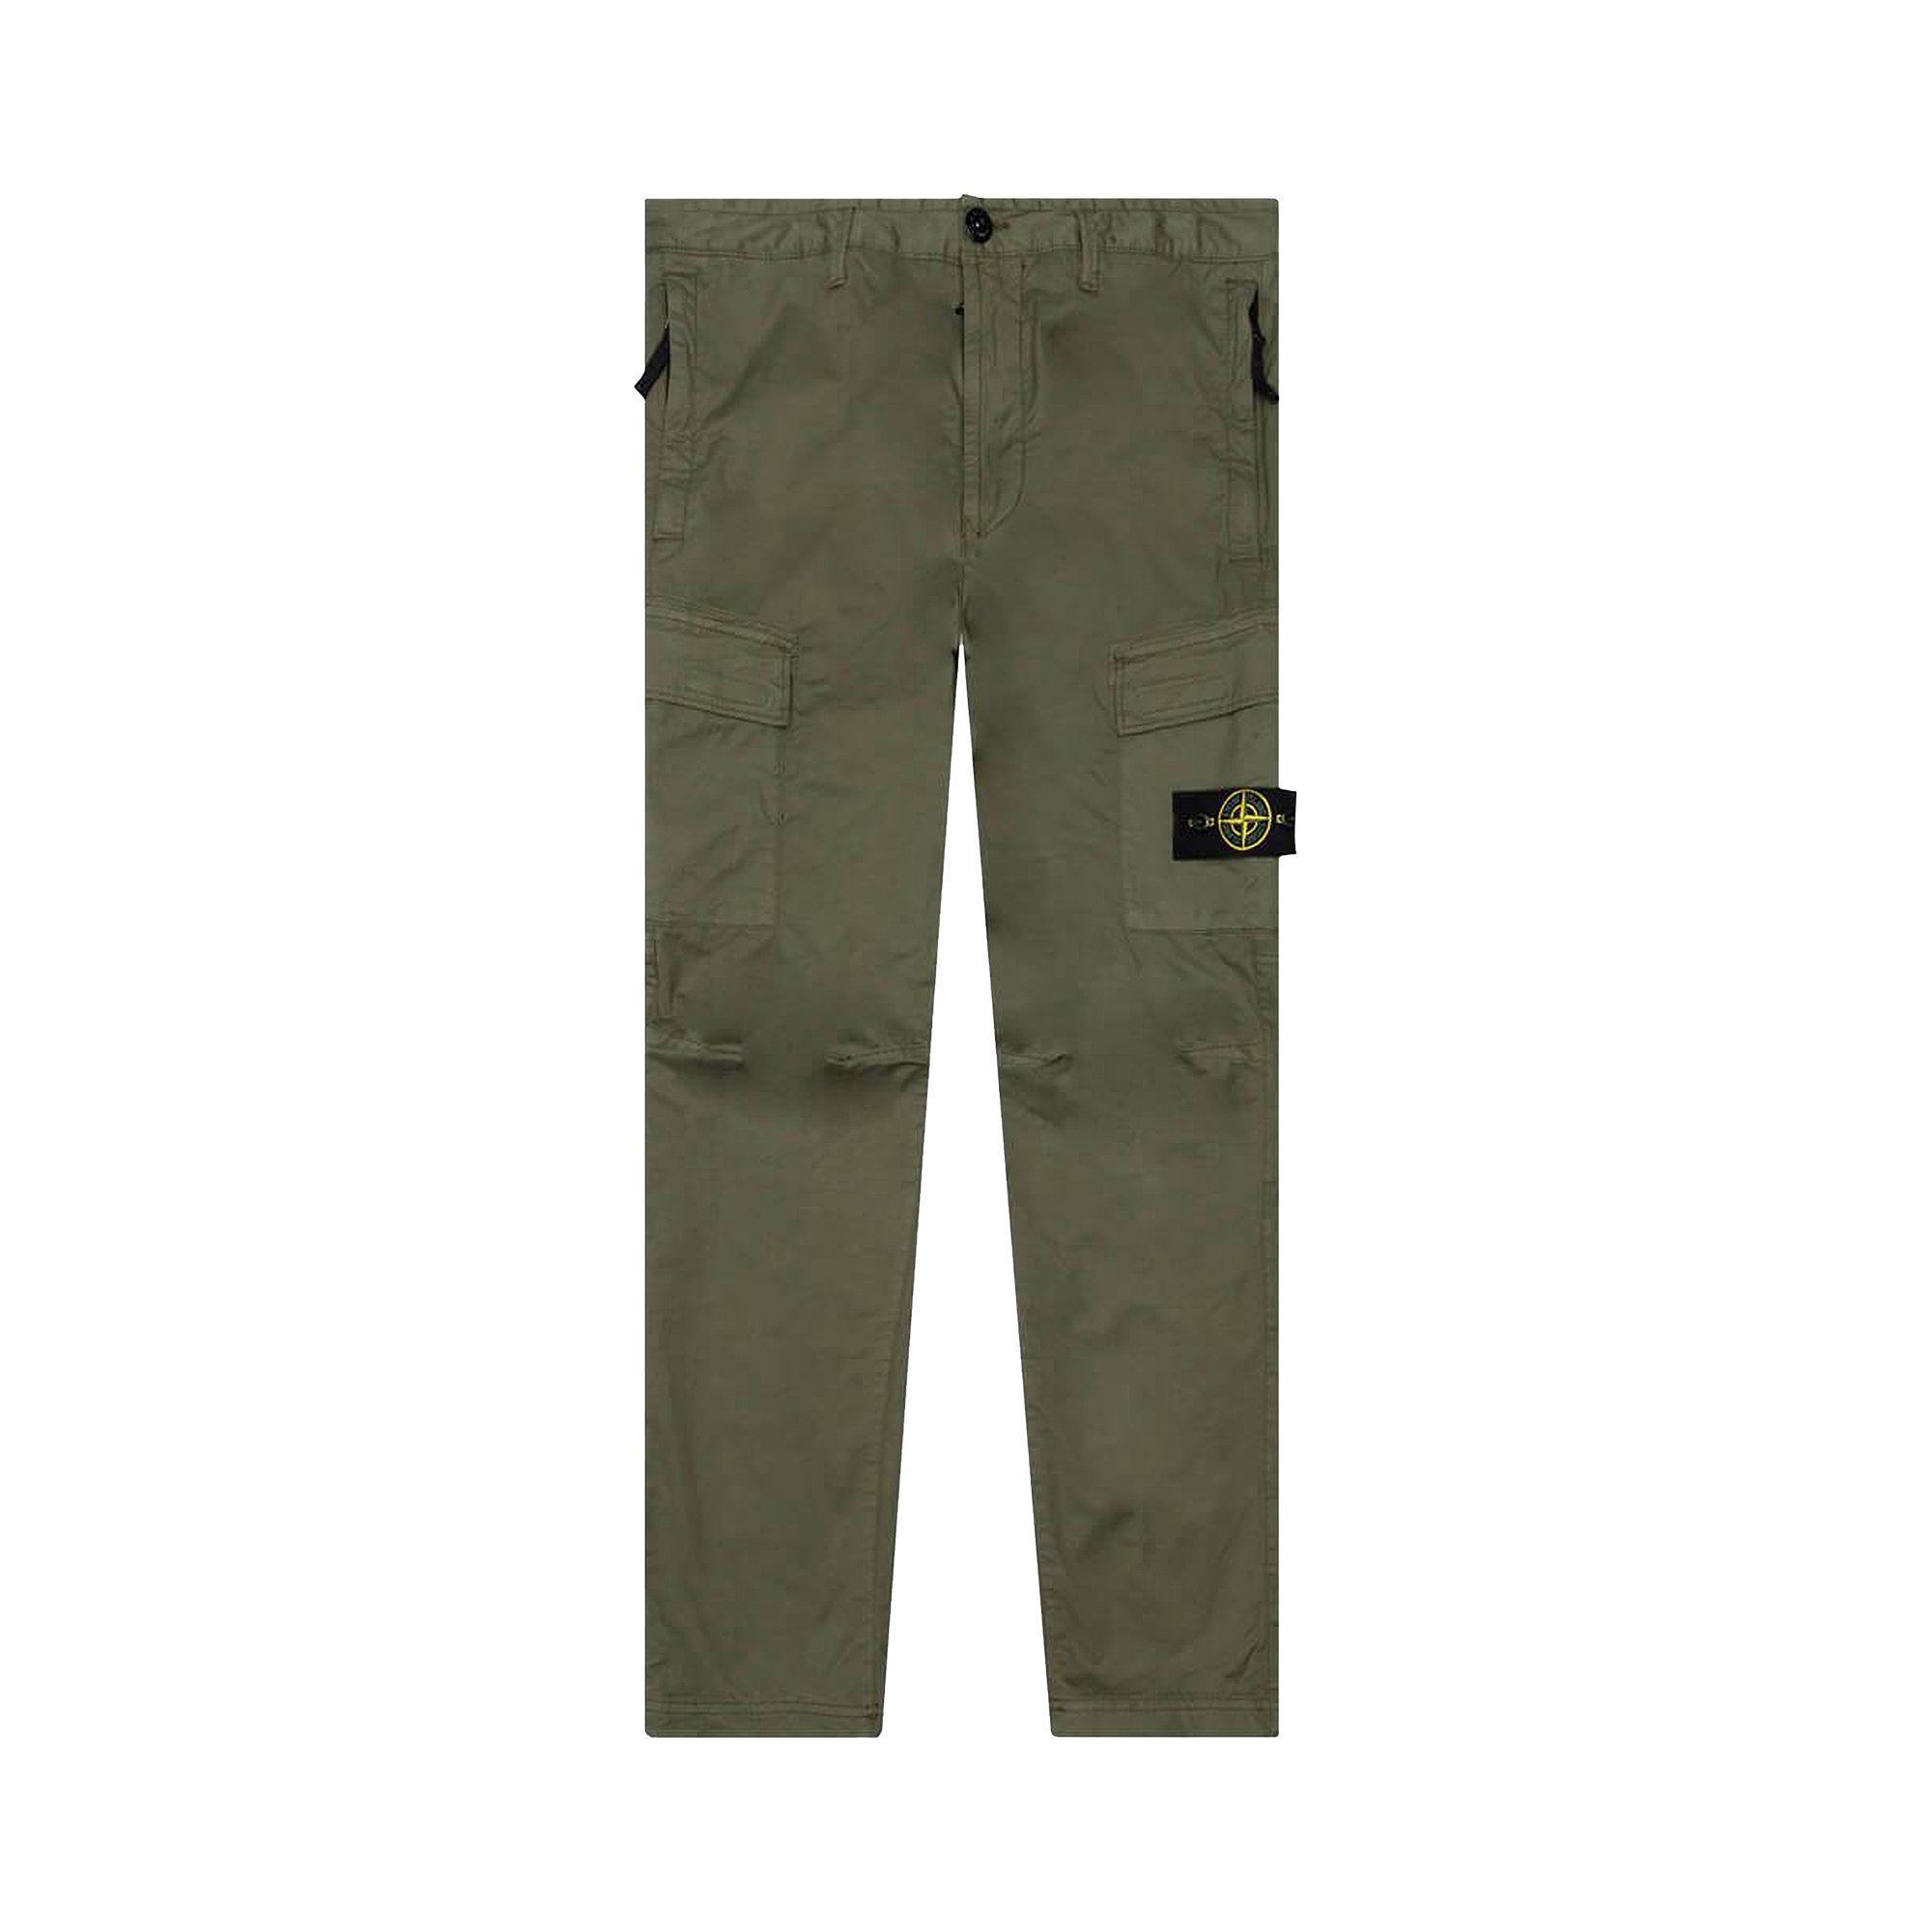 STONE ISLAND  Cargo Pants Olive Green 37849  Vousten Sports